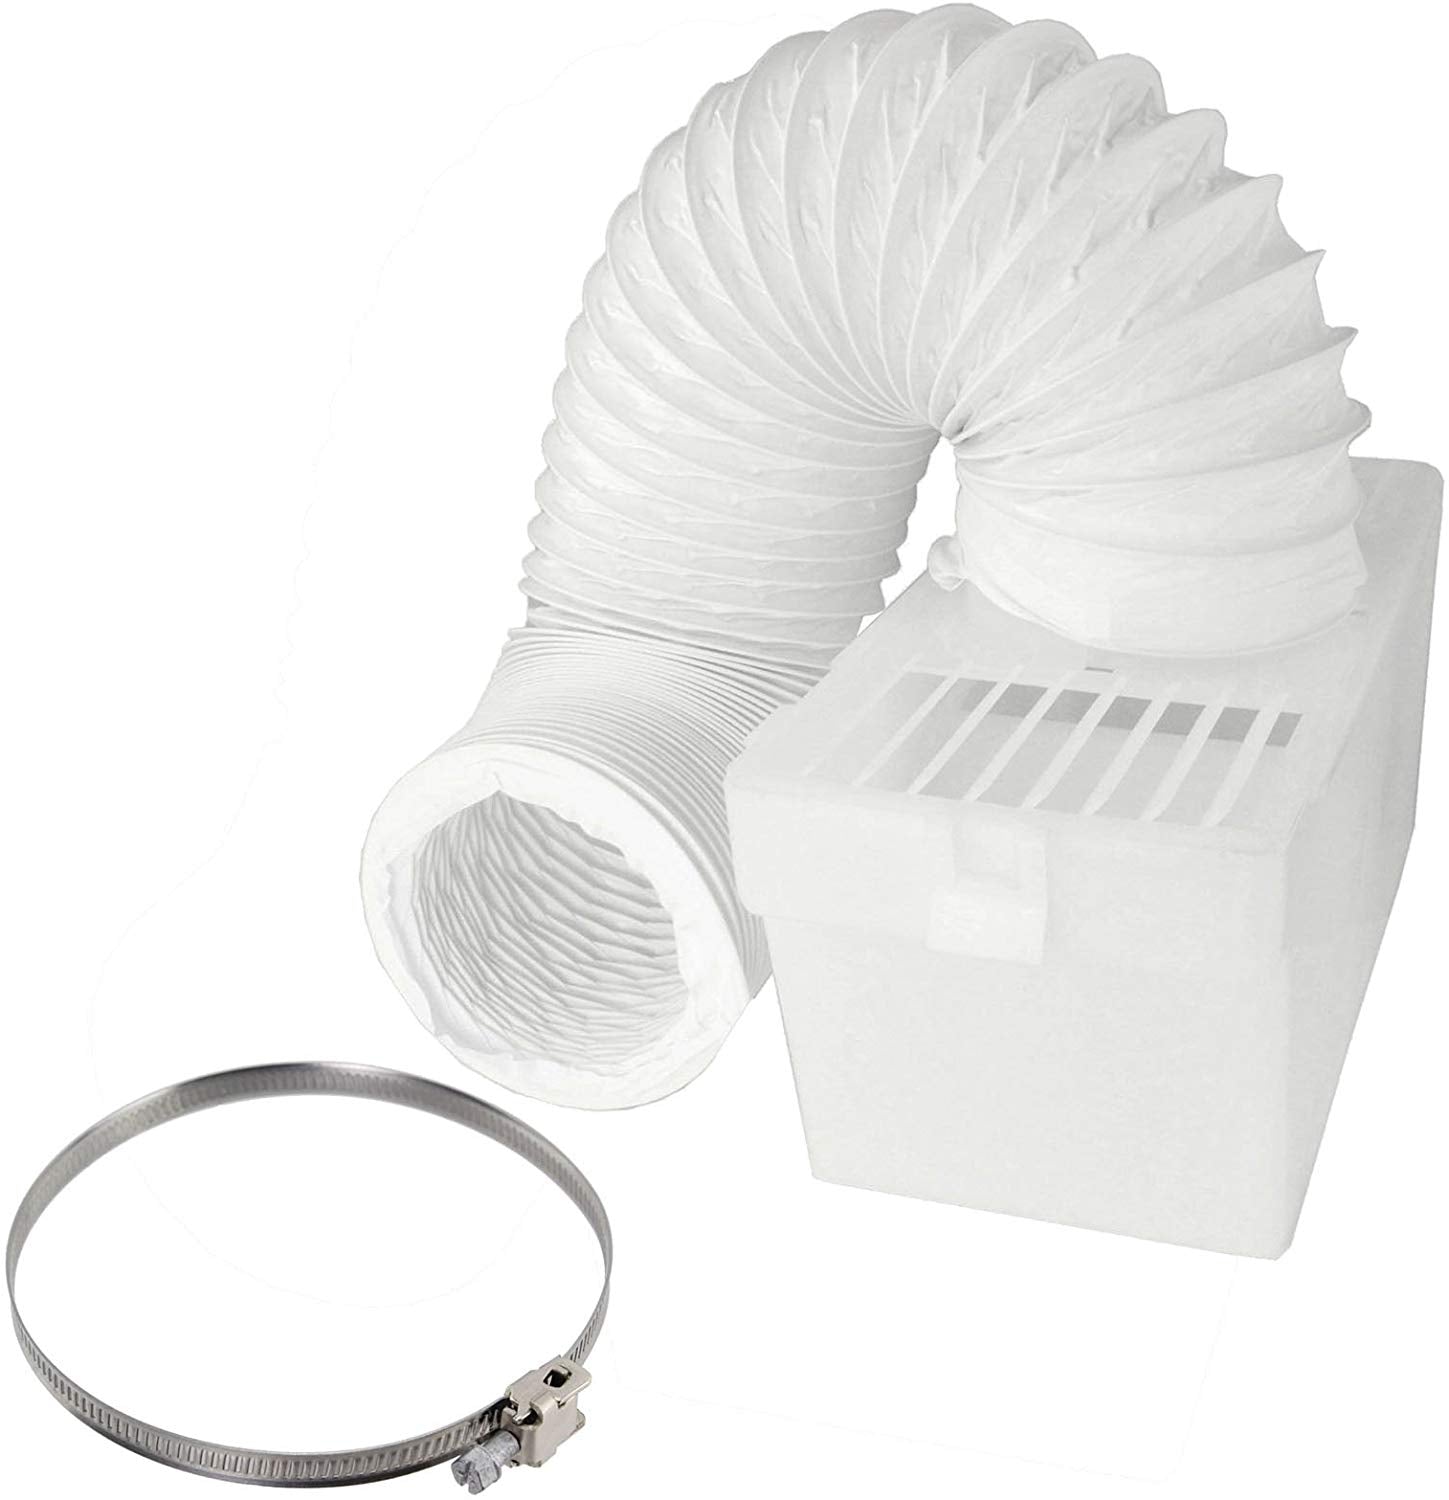 Condenser Vent Box & Hose Kit With Screw Clip for Swan Vented Tumble Dryer (4" / 100mm Diameter)